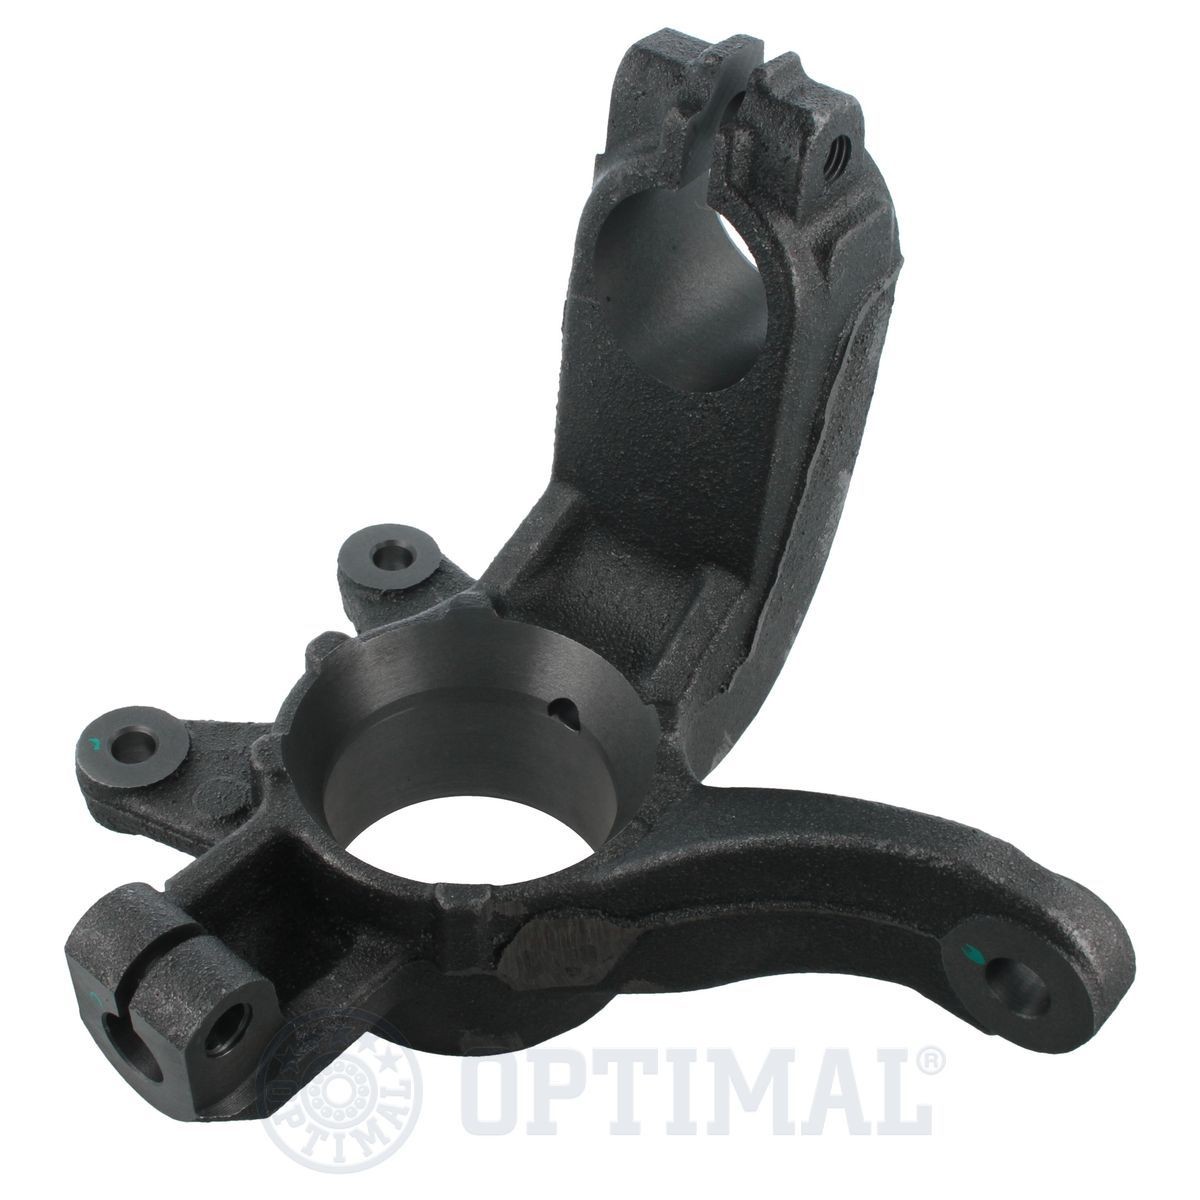 Original KN-301045-01-R OPTIMAL Steering knuckle experience and price